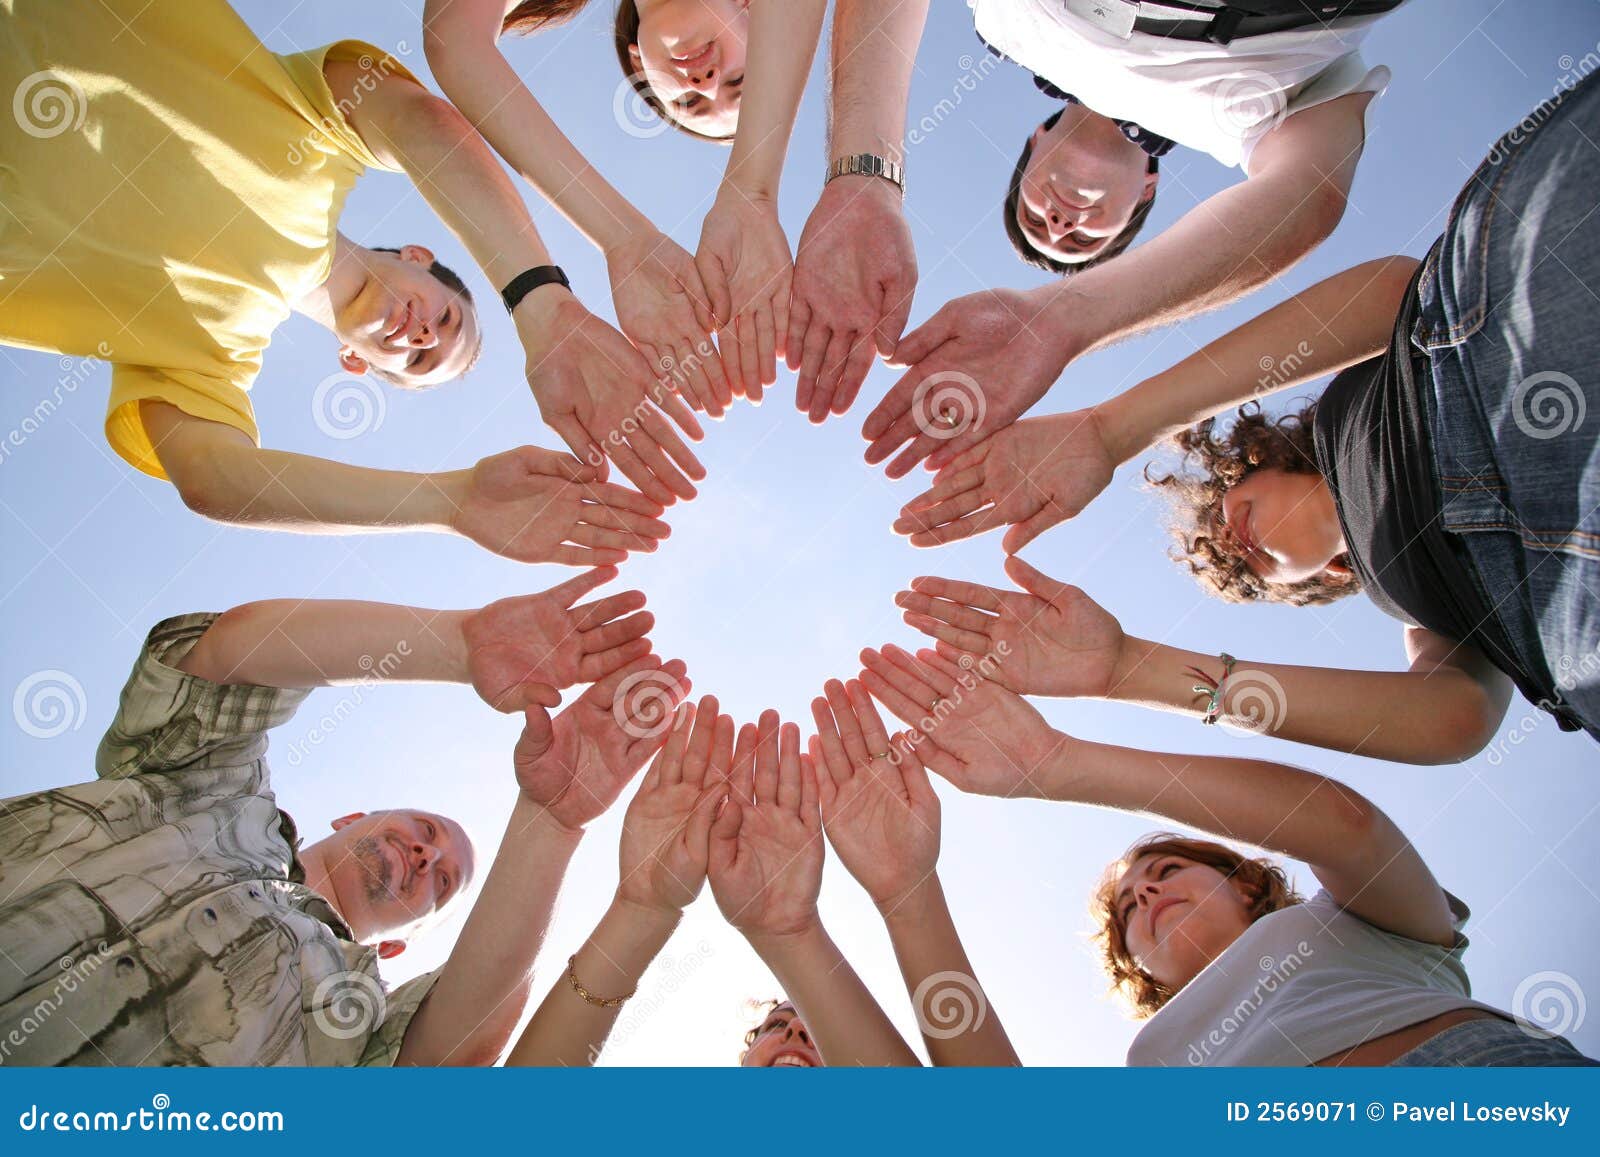 Seven friends stock image. Image of teamwork, power, happiness ...